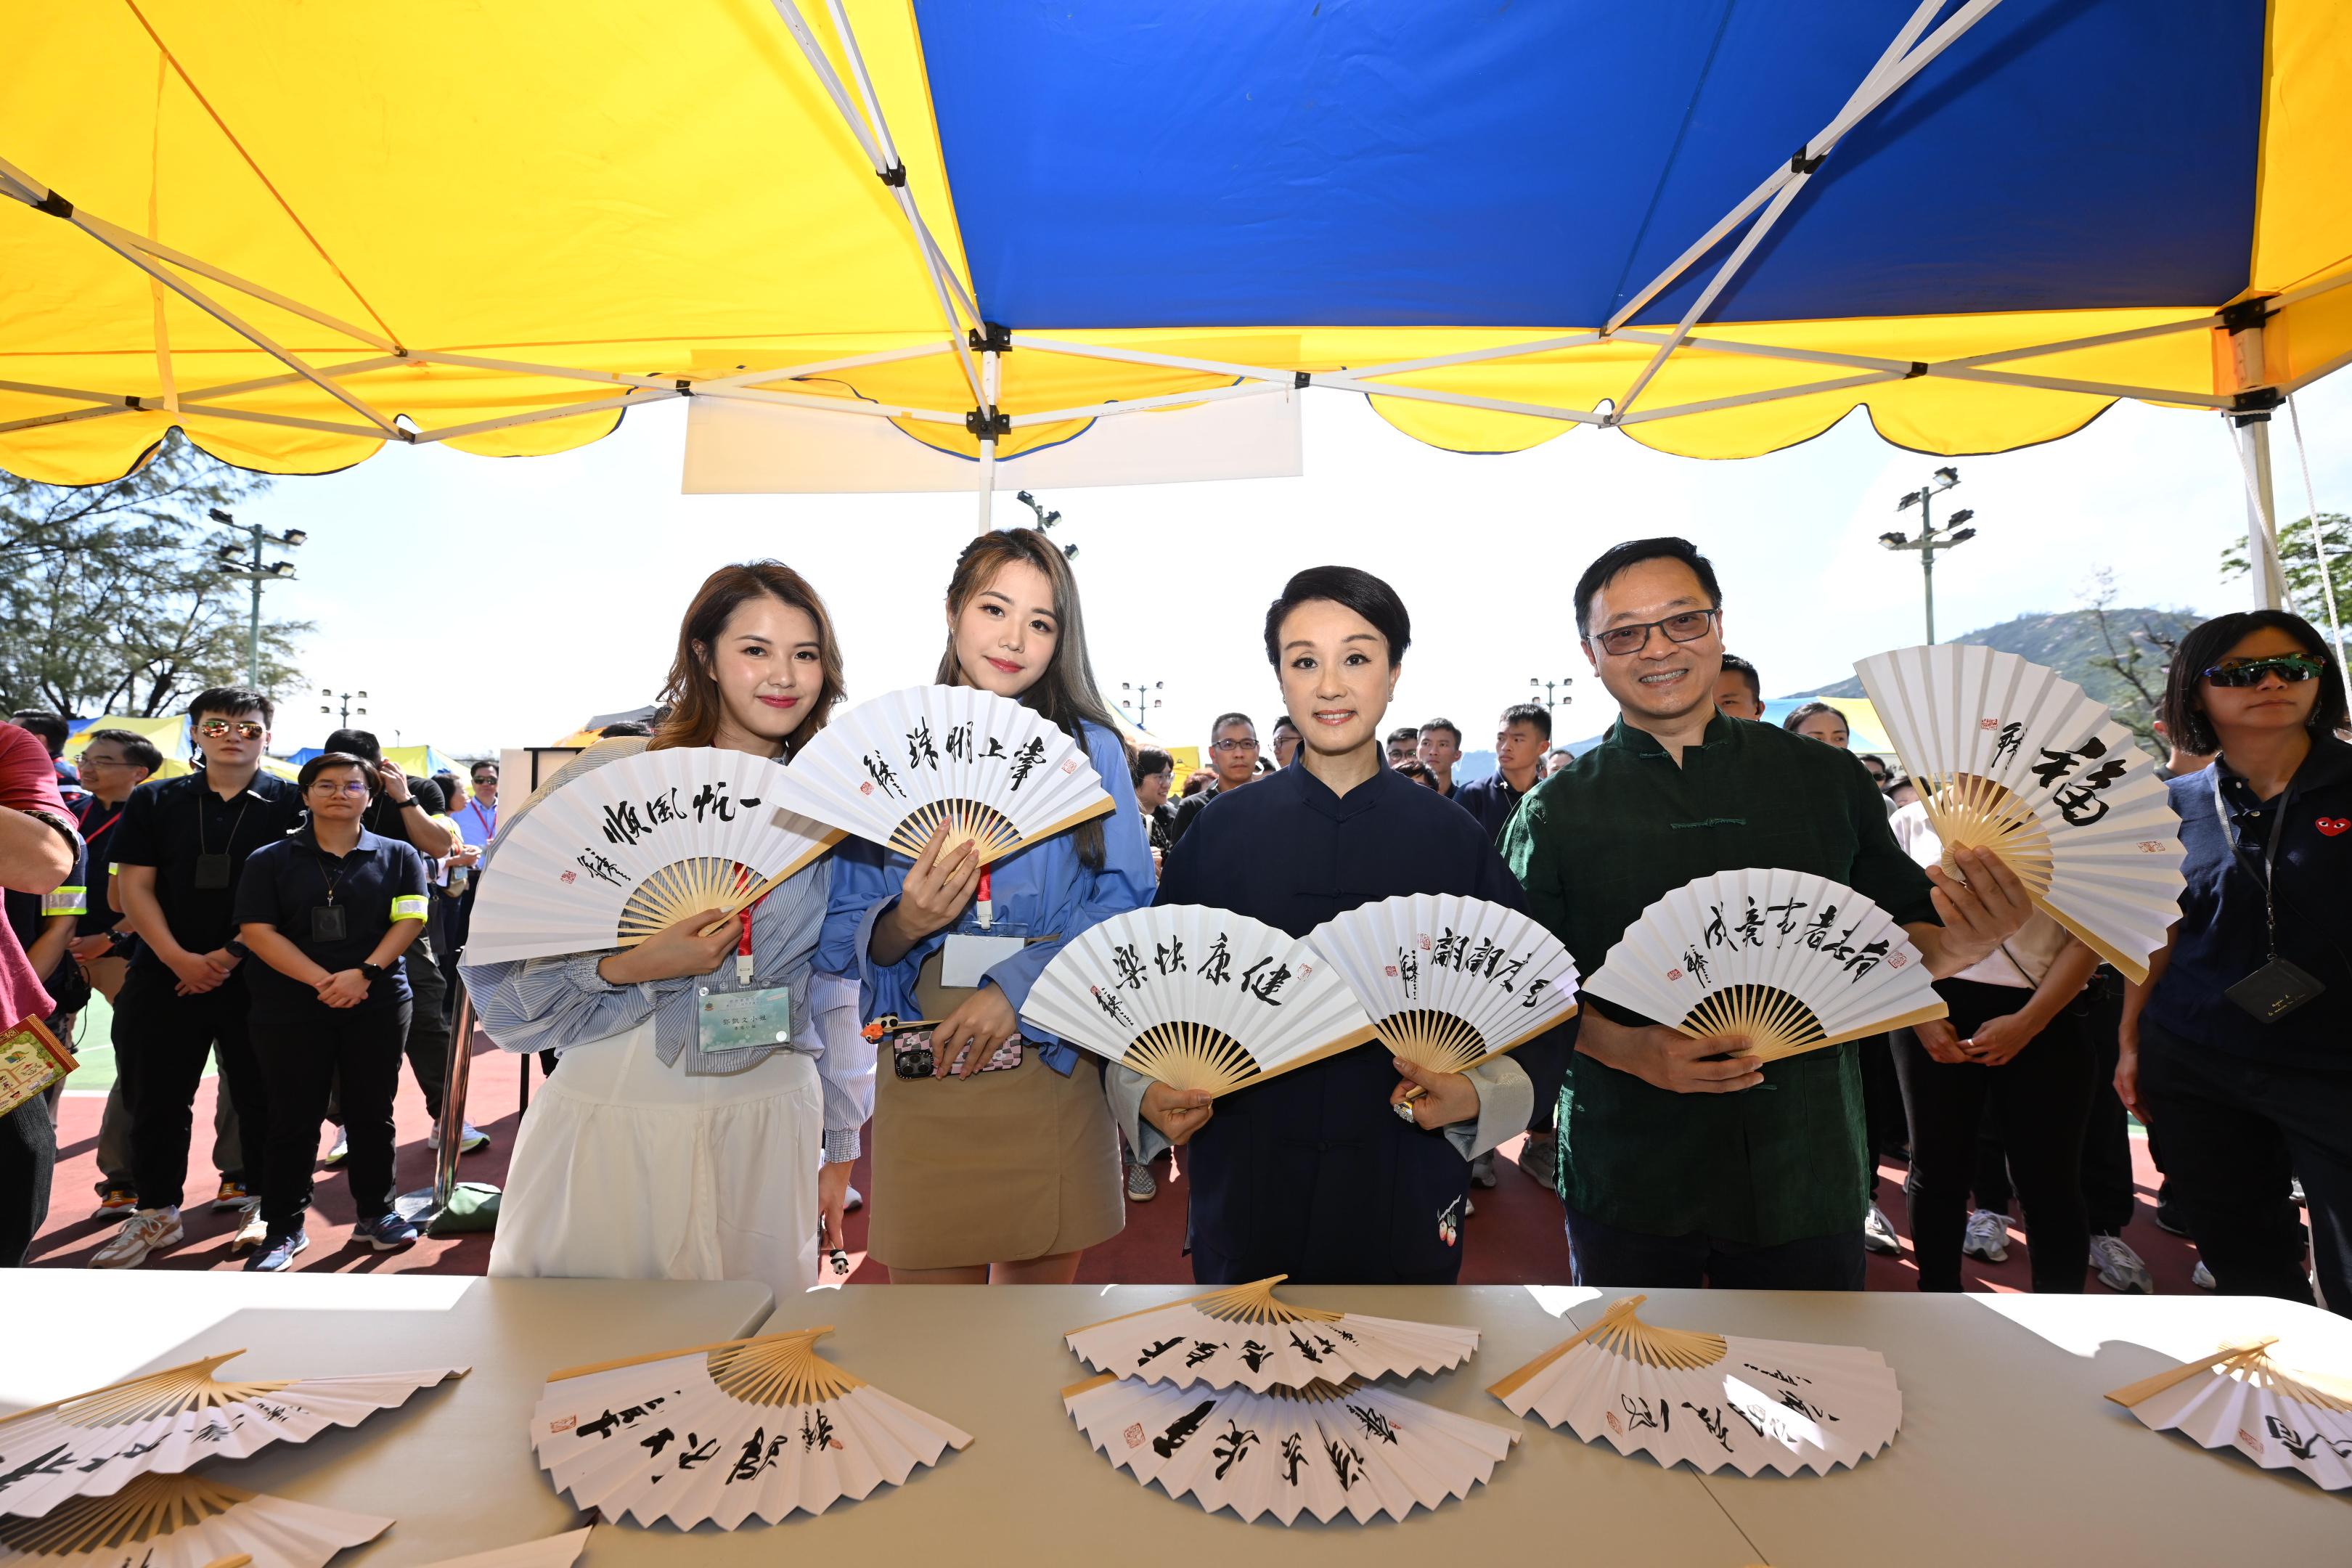 The Correctional Services Department (CSD) Sports Association held the CSD's 68th Autumn Fair at the football field adjacent to Stanley Prison today (November 4). Photo shows renowned Cantonese opera virtuoso Joyce Koi (second right), the Commissioner of Correctional Services, Mr Wong Kwok-hing (first right) and Miss Hong Kong 2023 touring a booth.